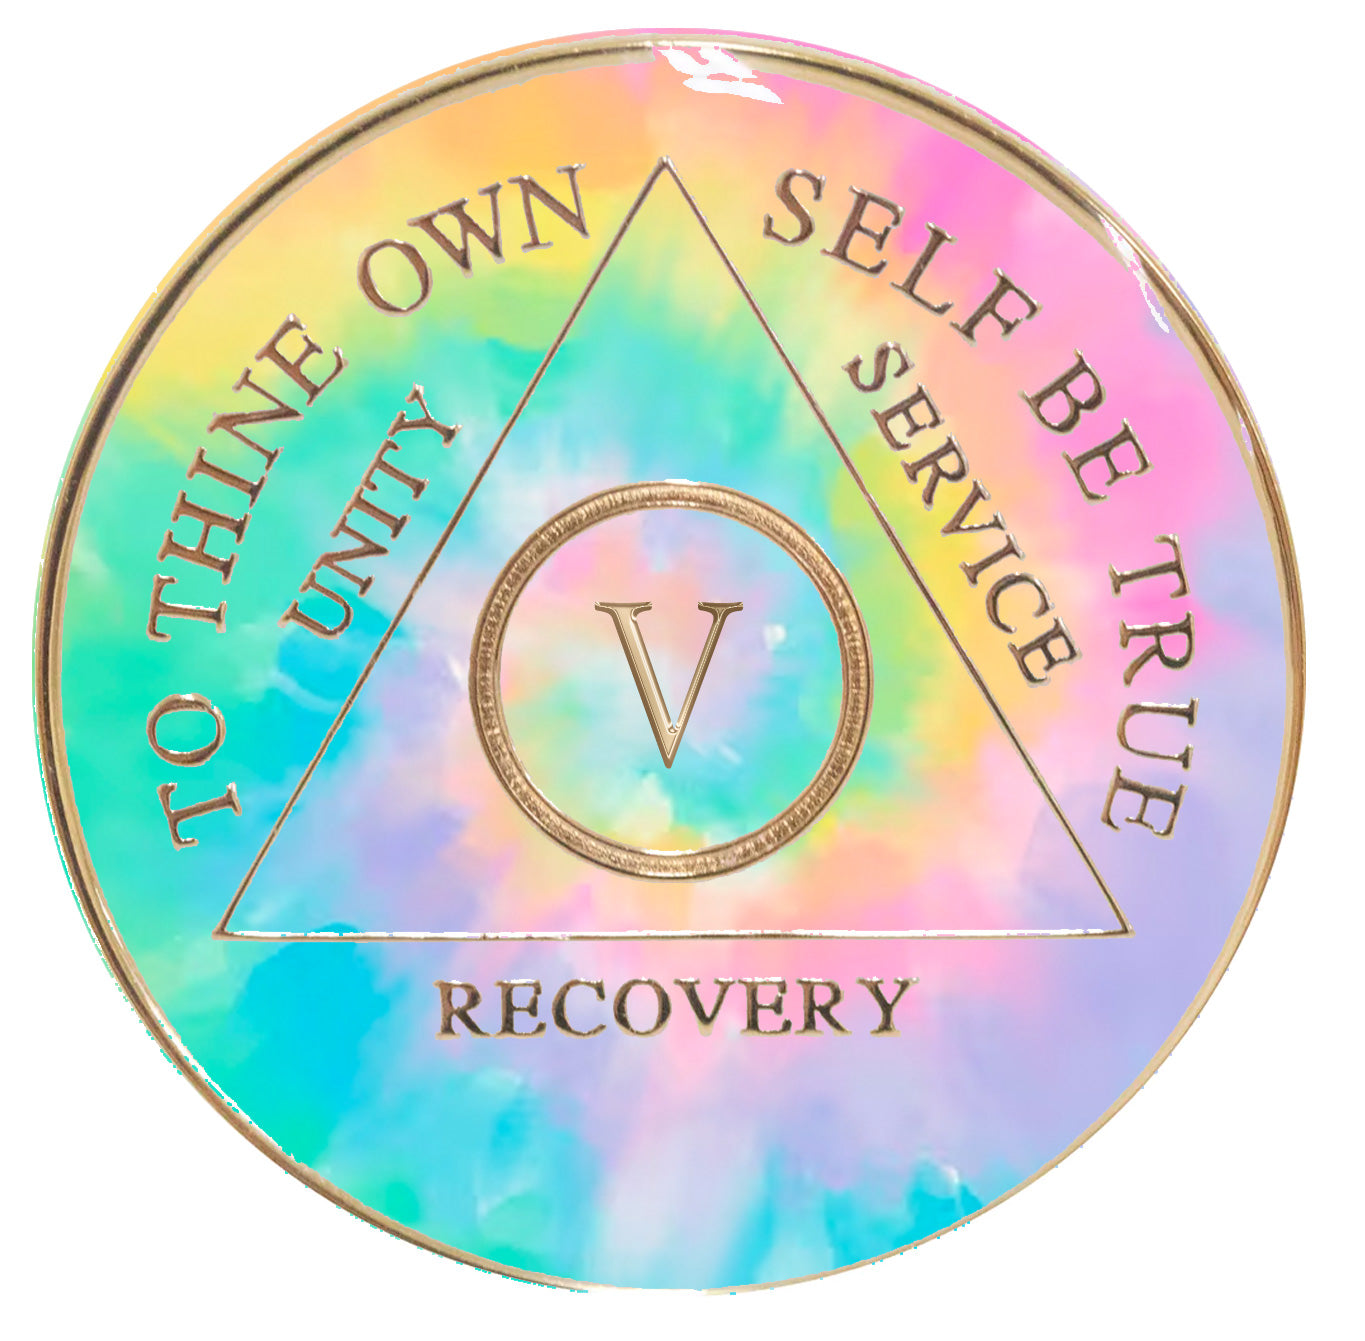 5 year AA psychic-delic change medallion is tie-dye in soft pink, yellow, purple, and blues with the circle, triangle, roman numeral, unity, service, recovery, and to thine own self be true embossed in 14k gold, and the tie-dye representing change.